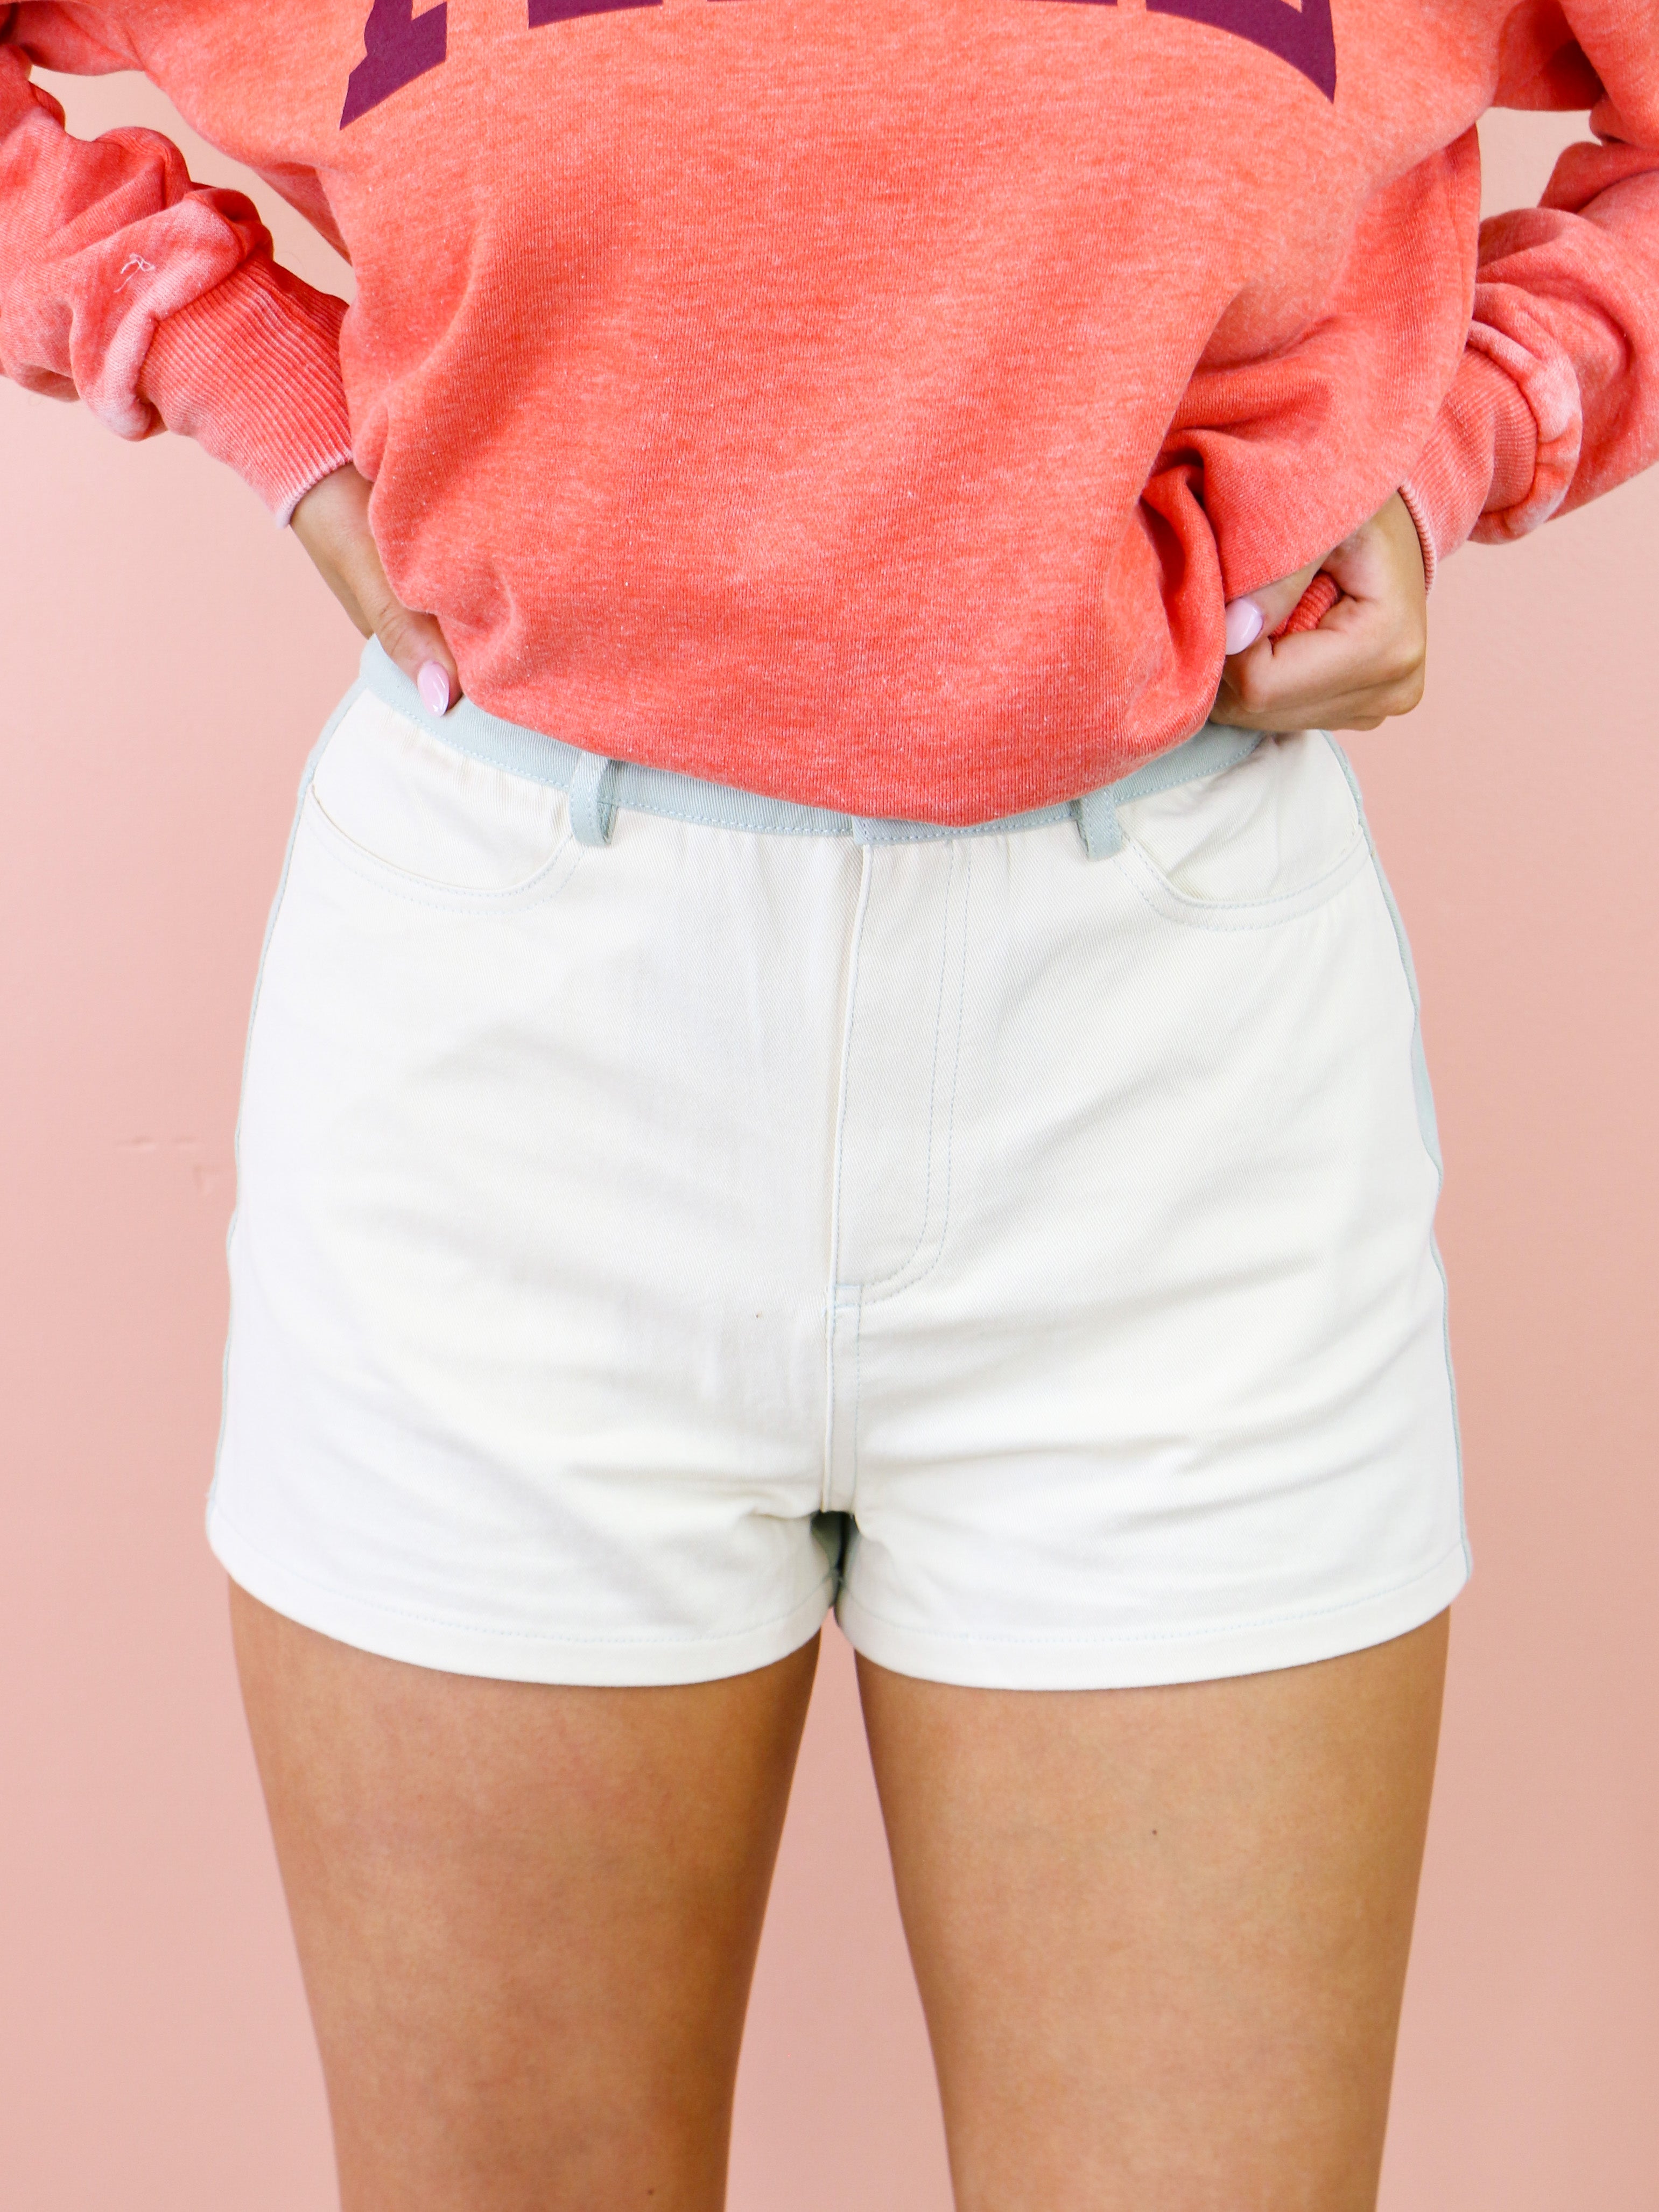 Owning The Moment Shorts